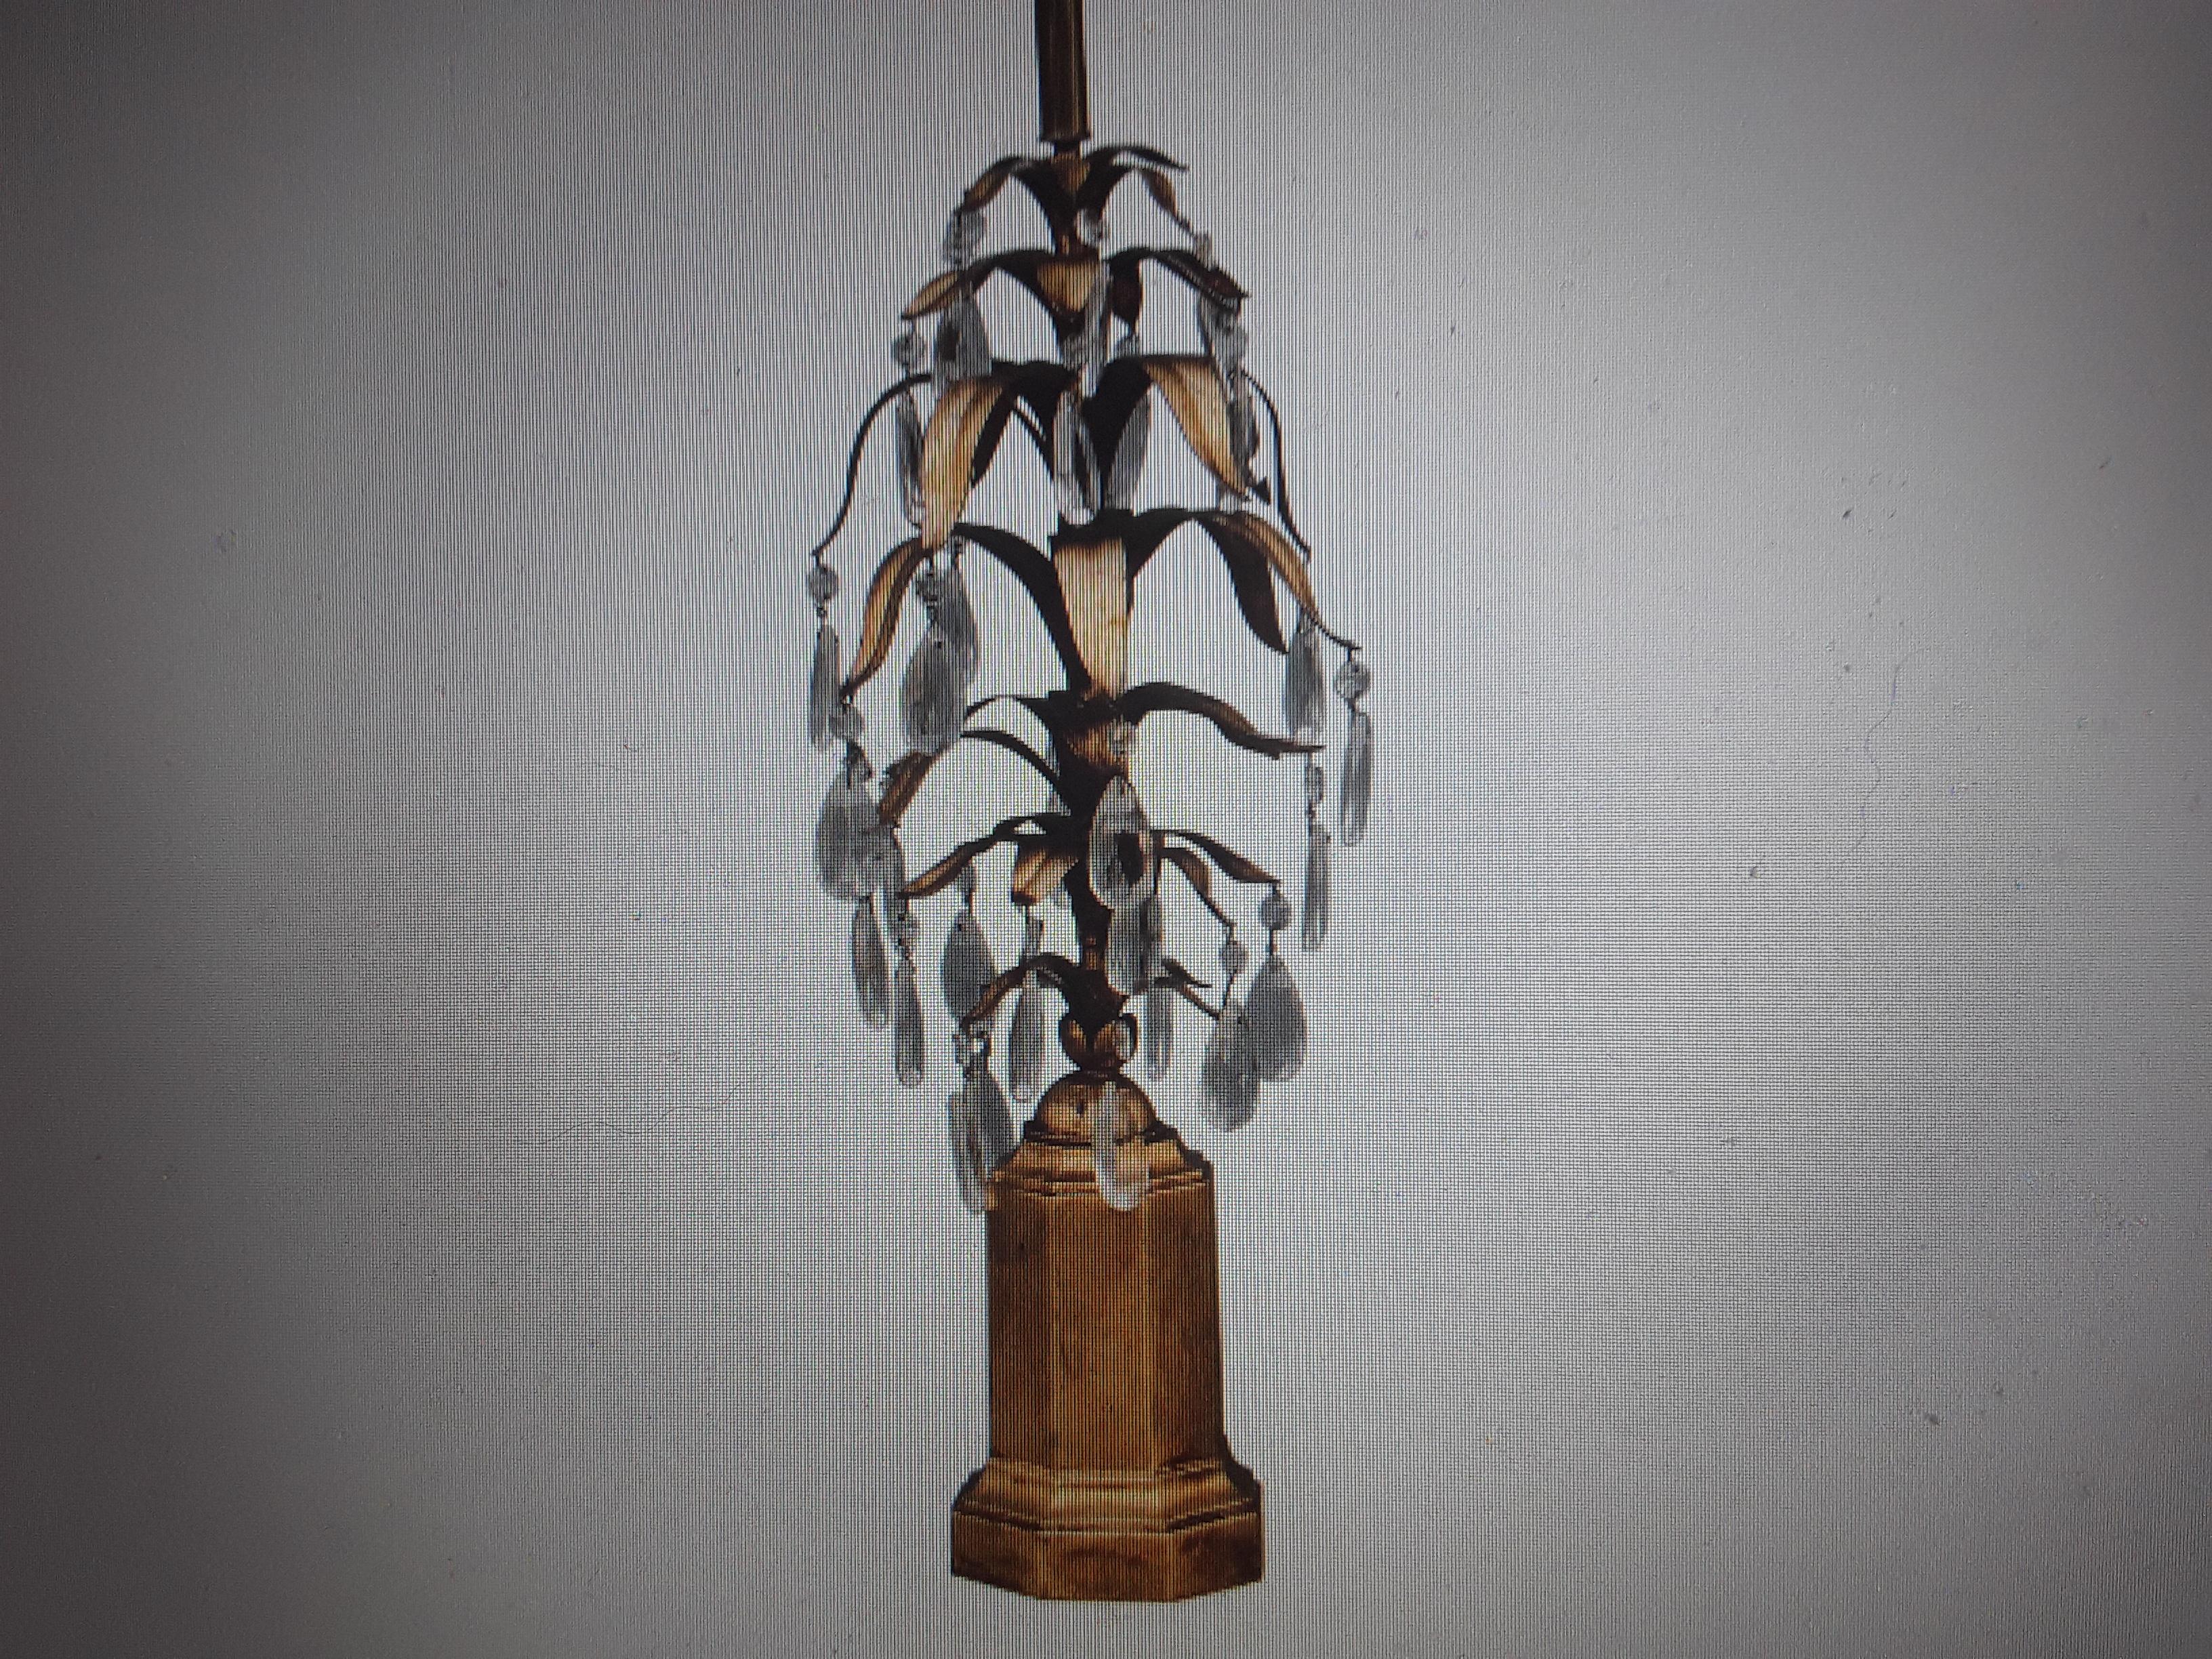 1950s Italian Hollywood Regency Giltwood Based Crystal/Tole Fern Form Table Lamp For Sale 4